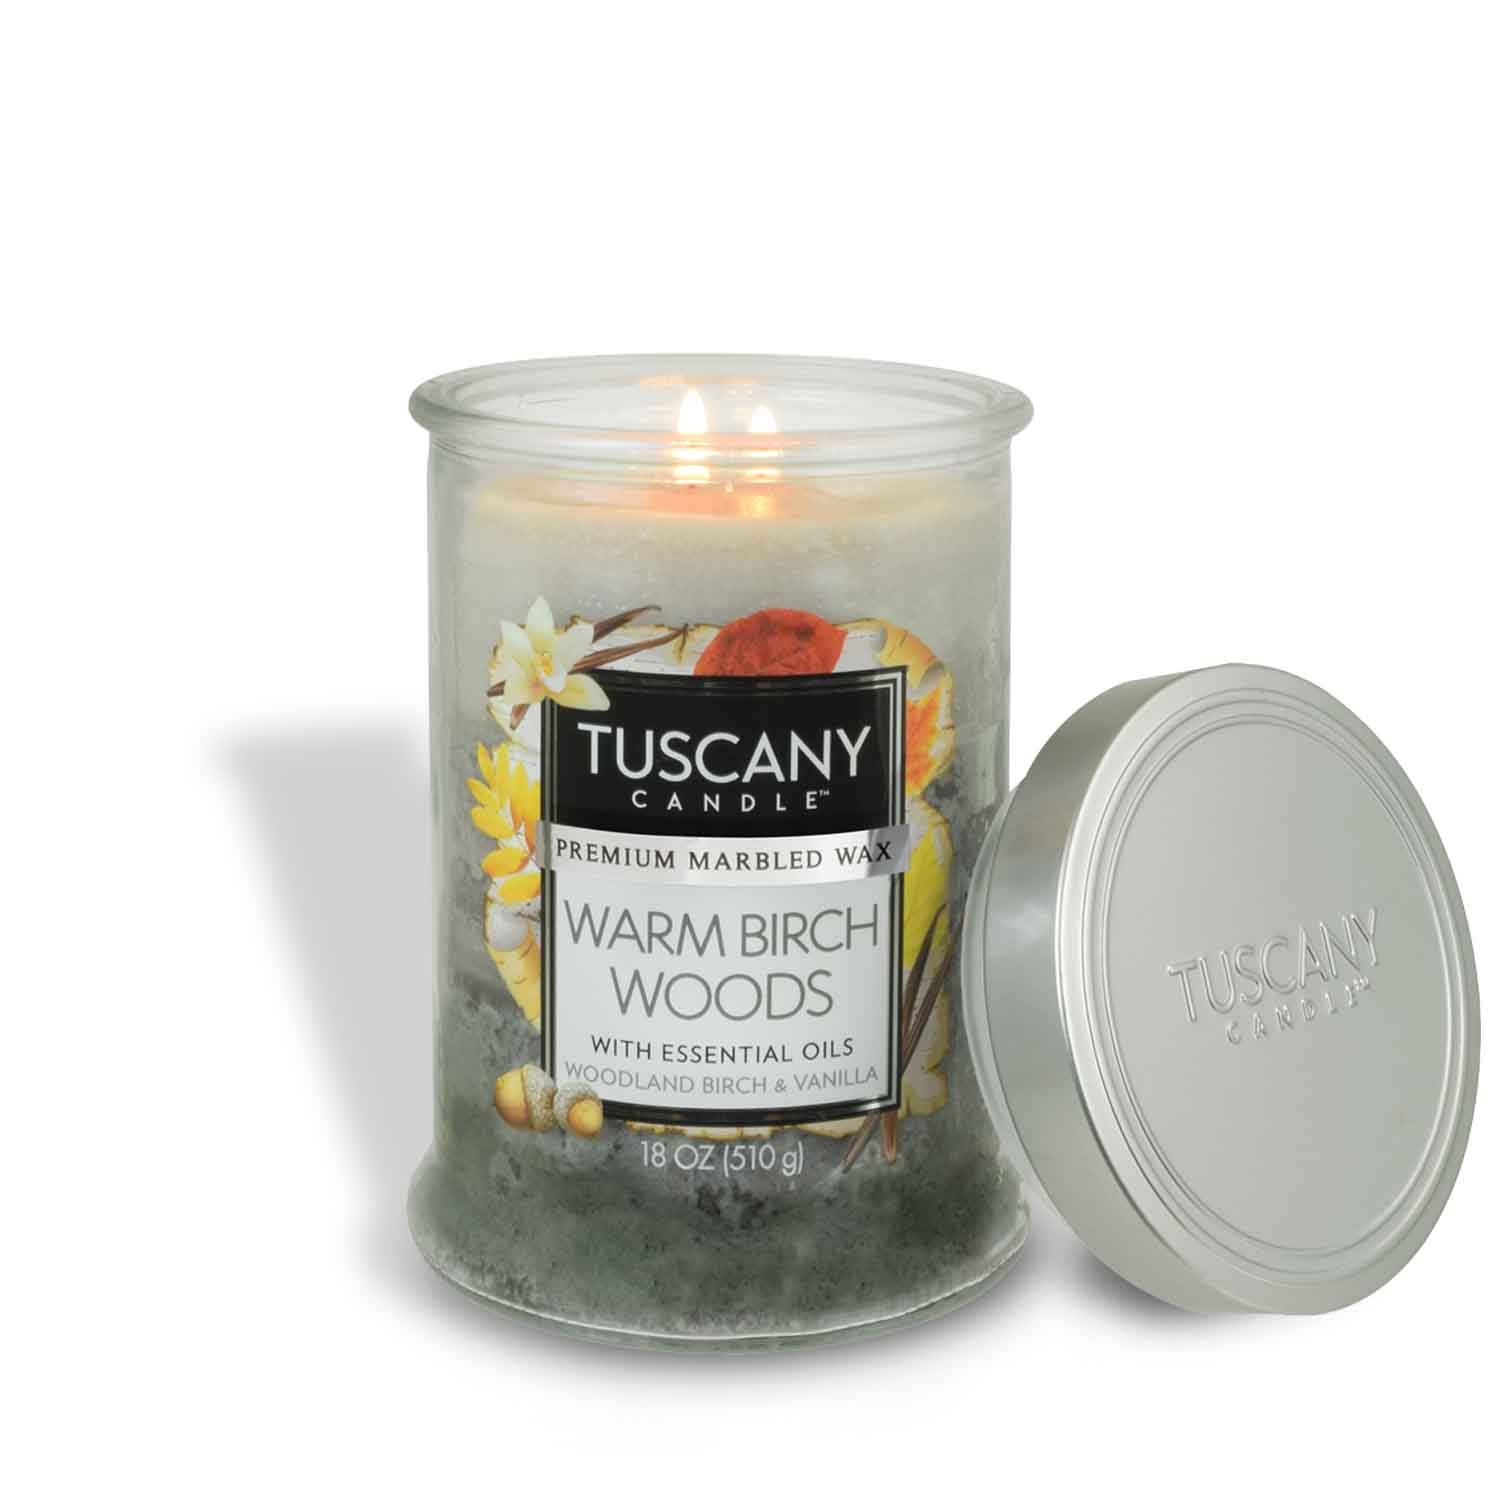 A Warm Birch Woods Long-Lasting Scented Jar Candle (18 oz) by Tuscany Candle with a lid on it.